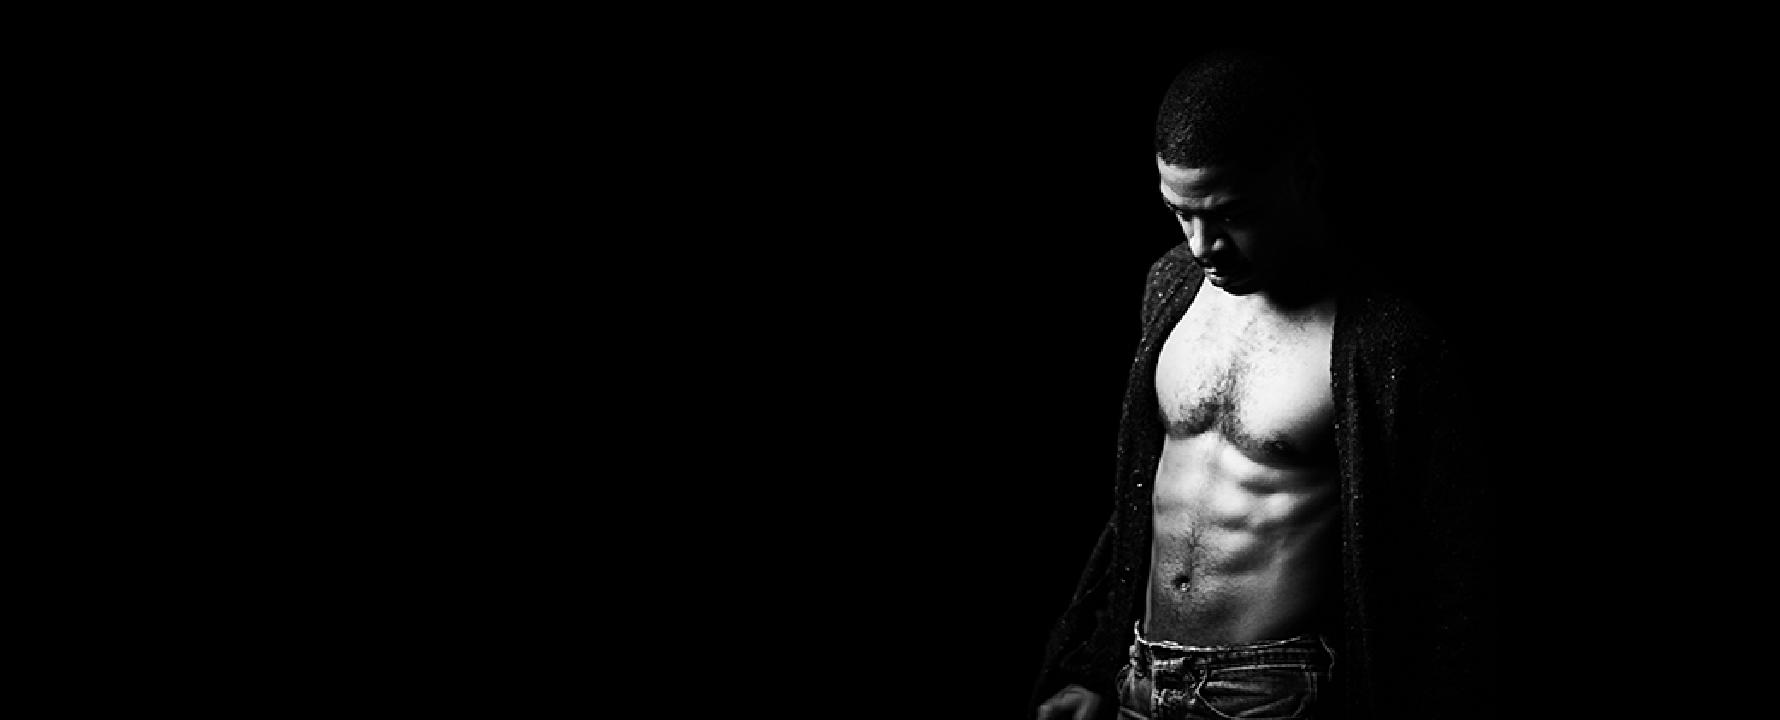 Promotional photograph of Kid Cudi.